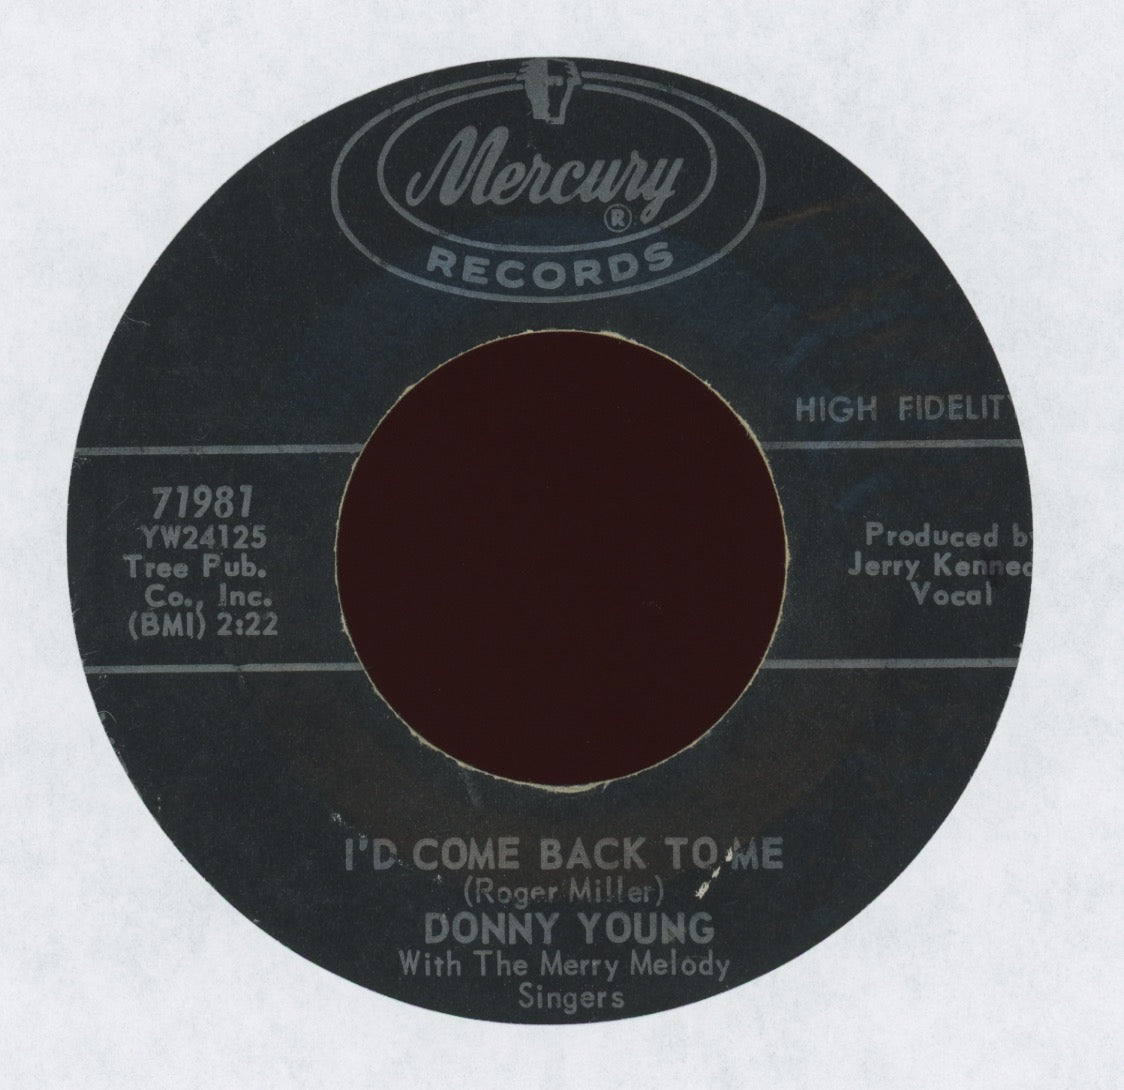 Donny Young - I'd Come Back To Me on Mercury